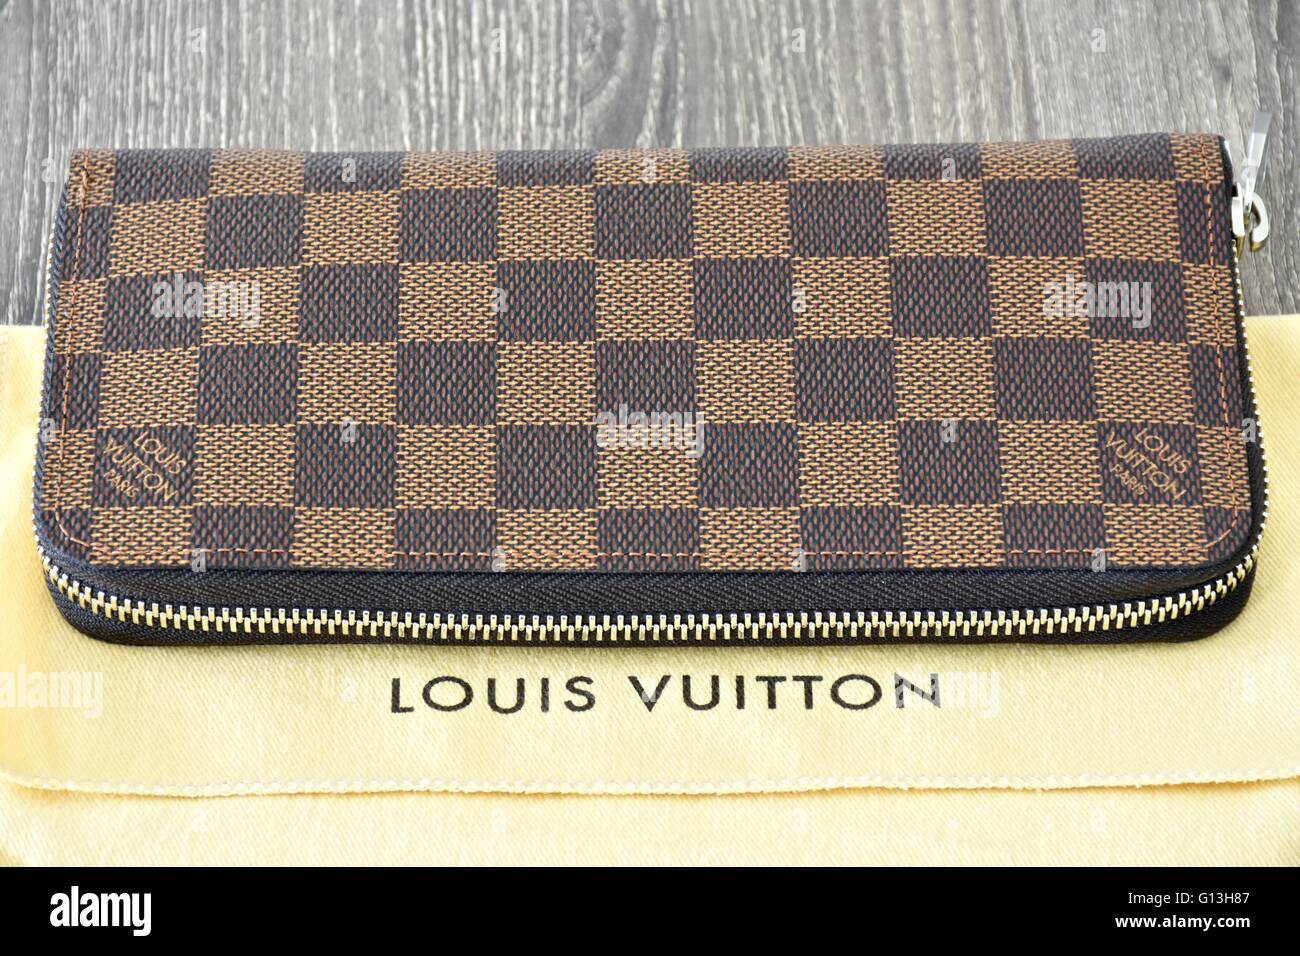 LV wallet photos for easier viewing than the reel. #lv #lvwallet